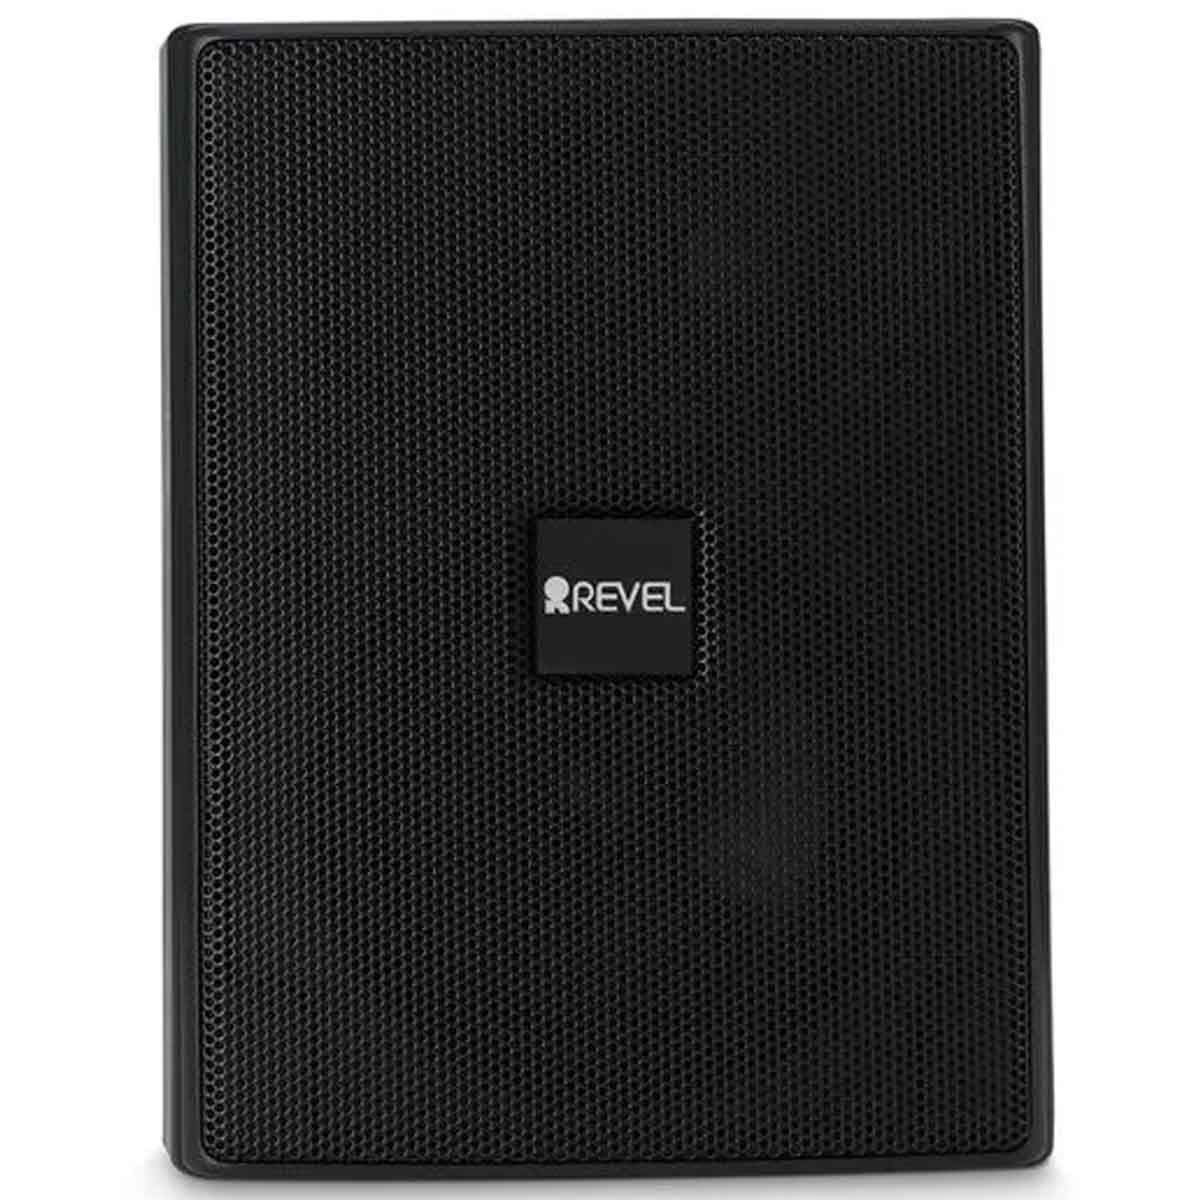 Revel M55XC 5.25" 2-Way Extreme Climate Loudspeaker - Pair front view with grille